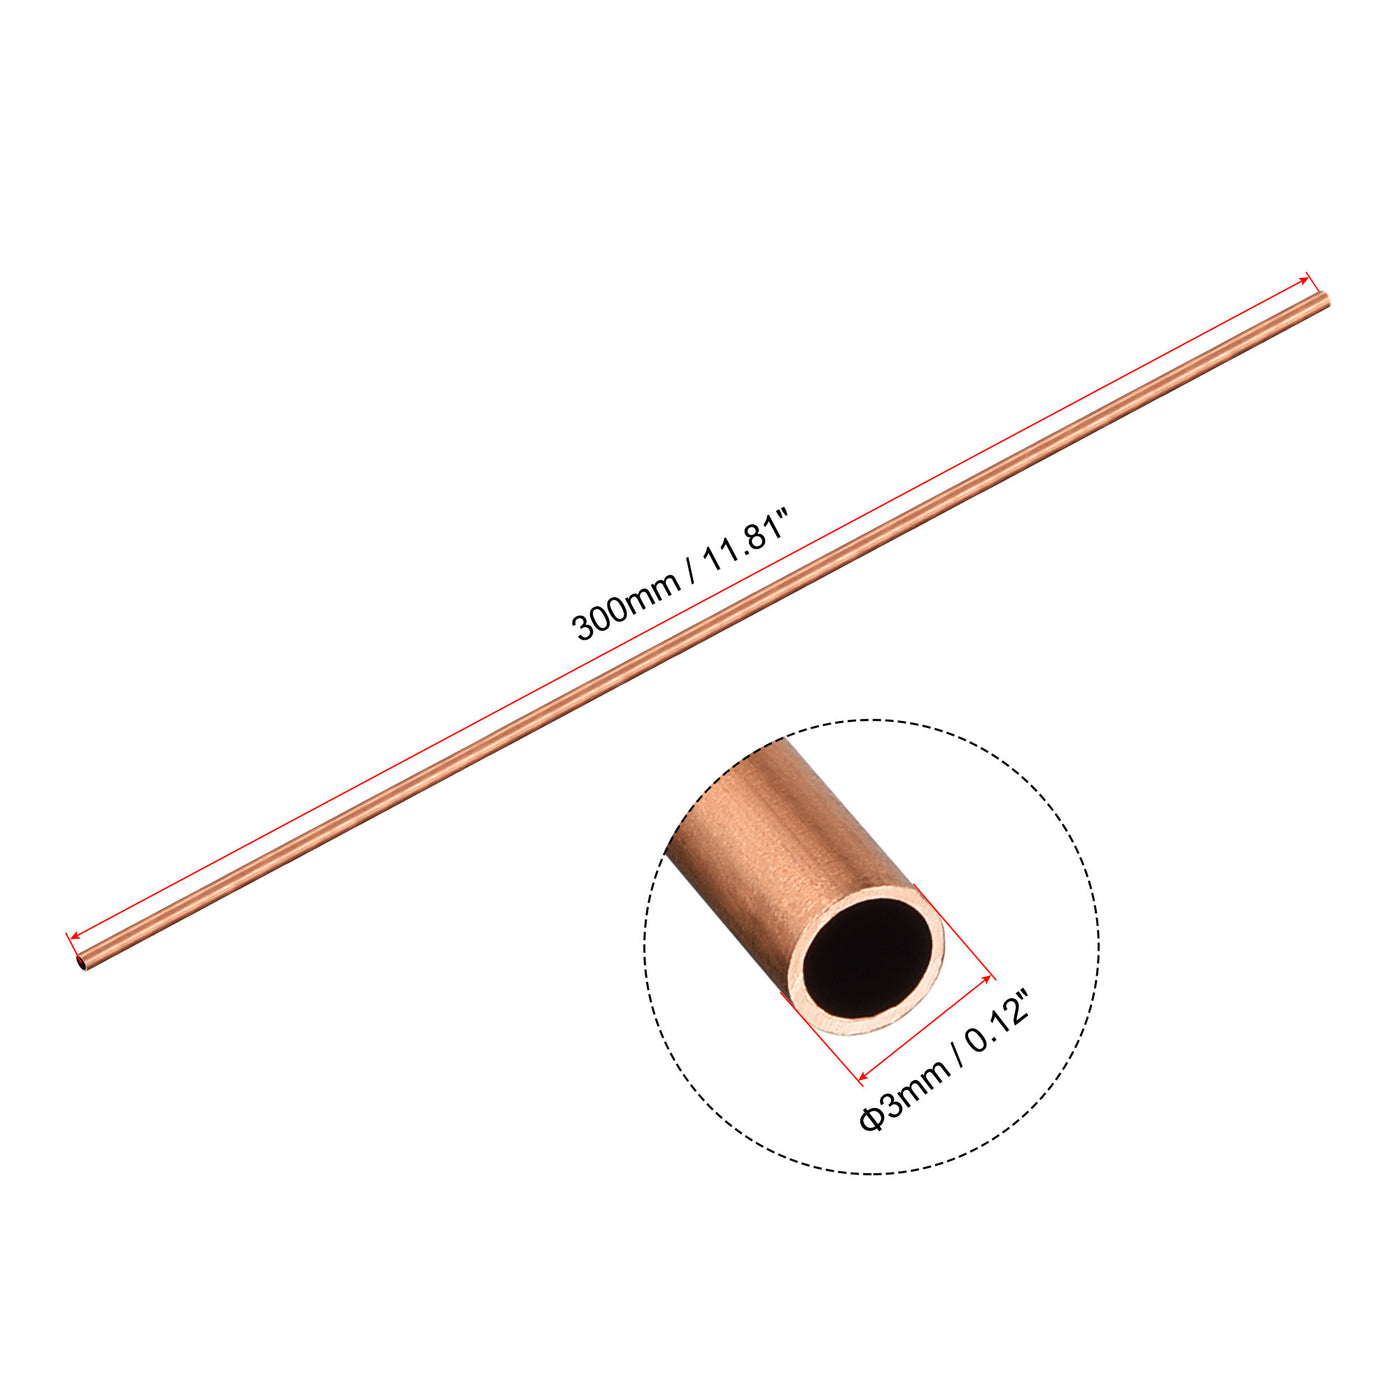 uxcell Uxcell Copper Tubing Seamless Straight Pipes Tubes